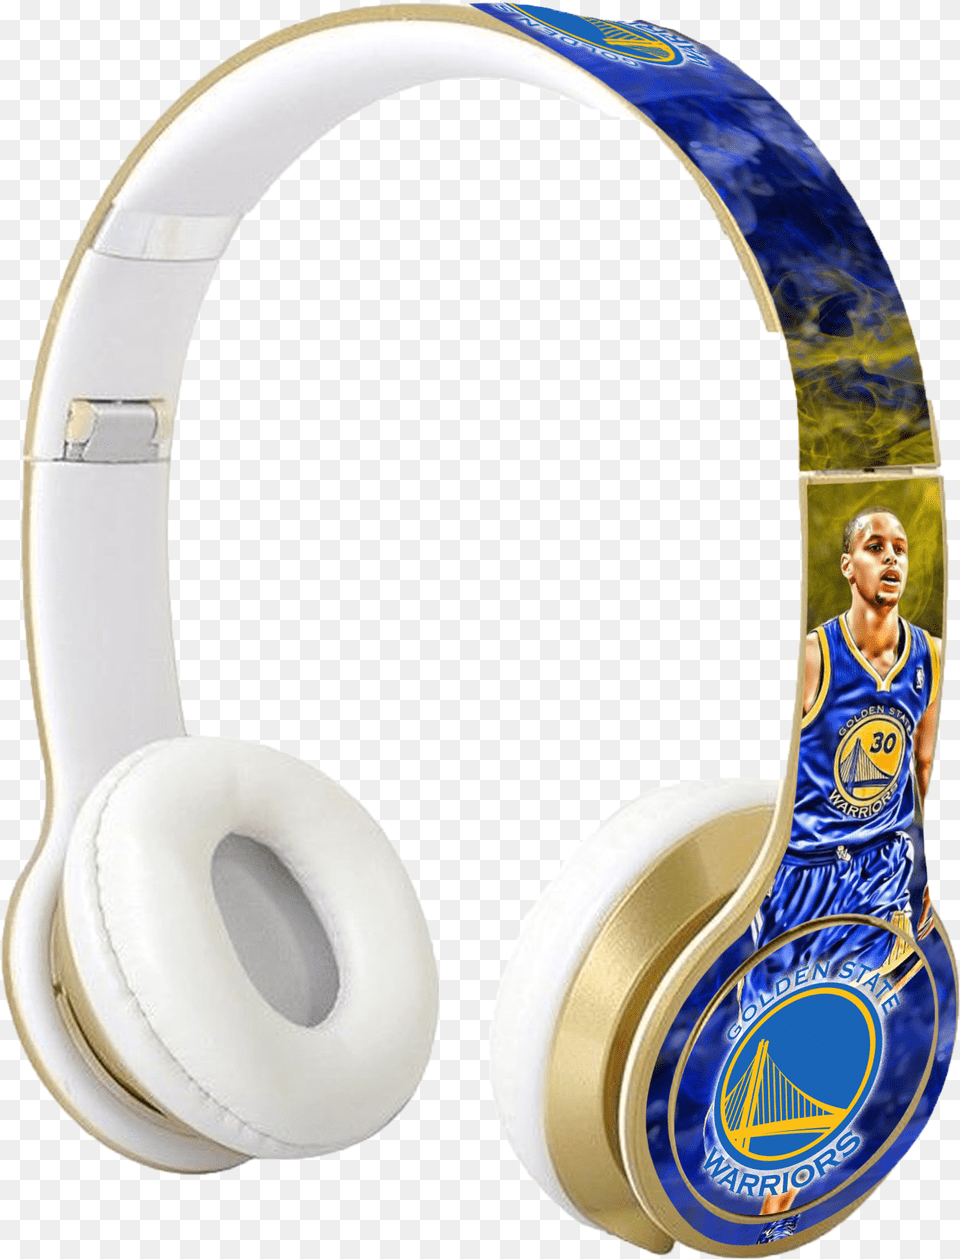 Stephen Original Stephen Curry Beats Headphones, Electronics, Tape, Face, Head Free Png Download